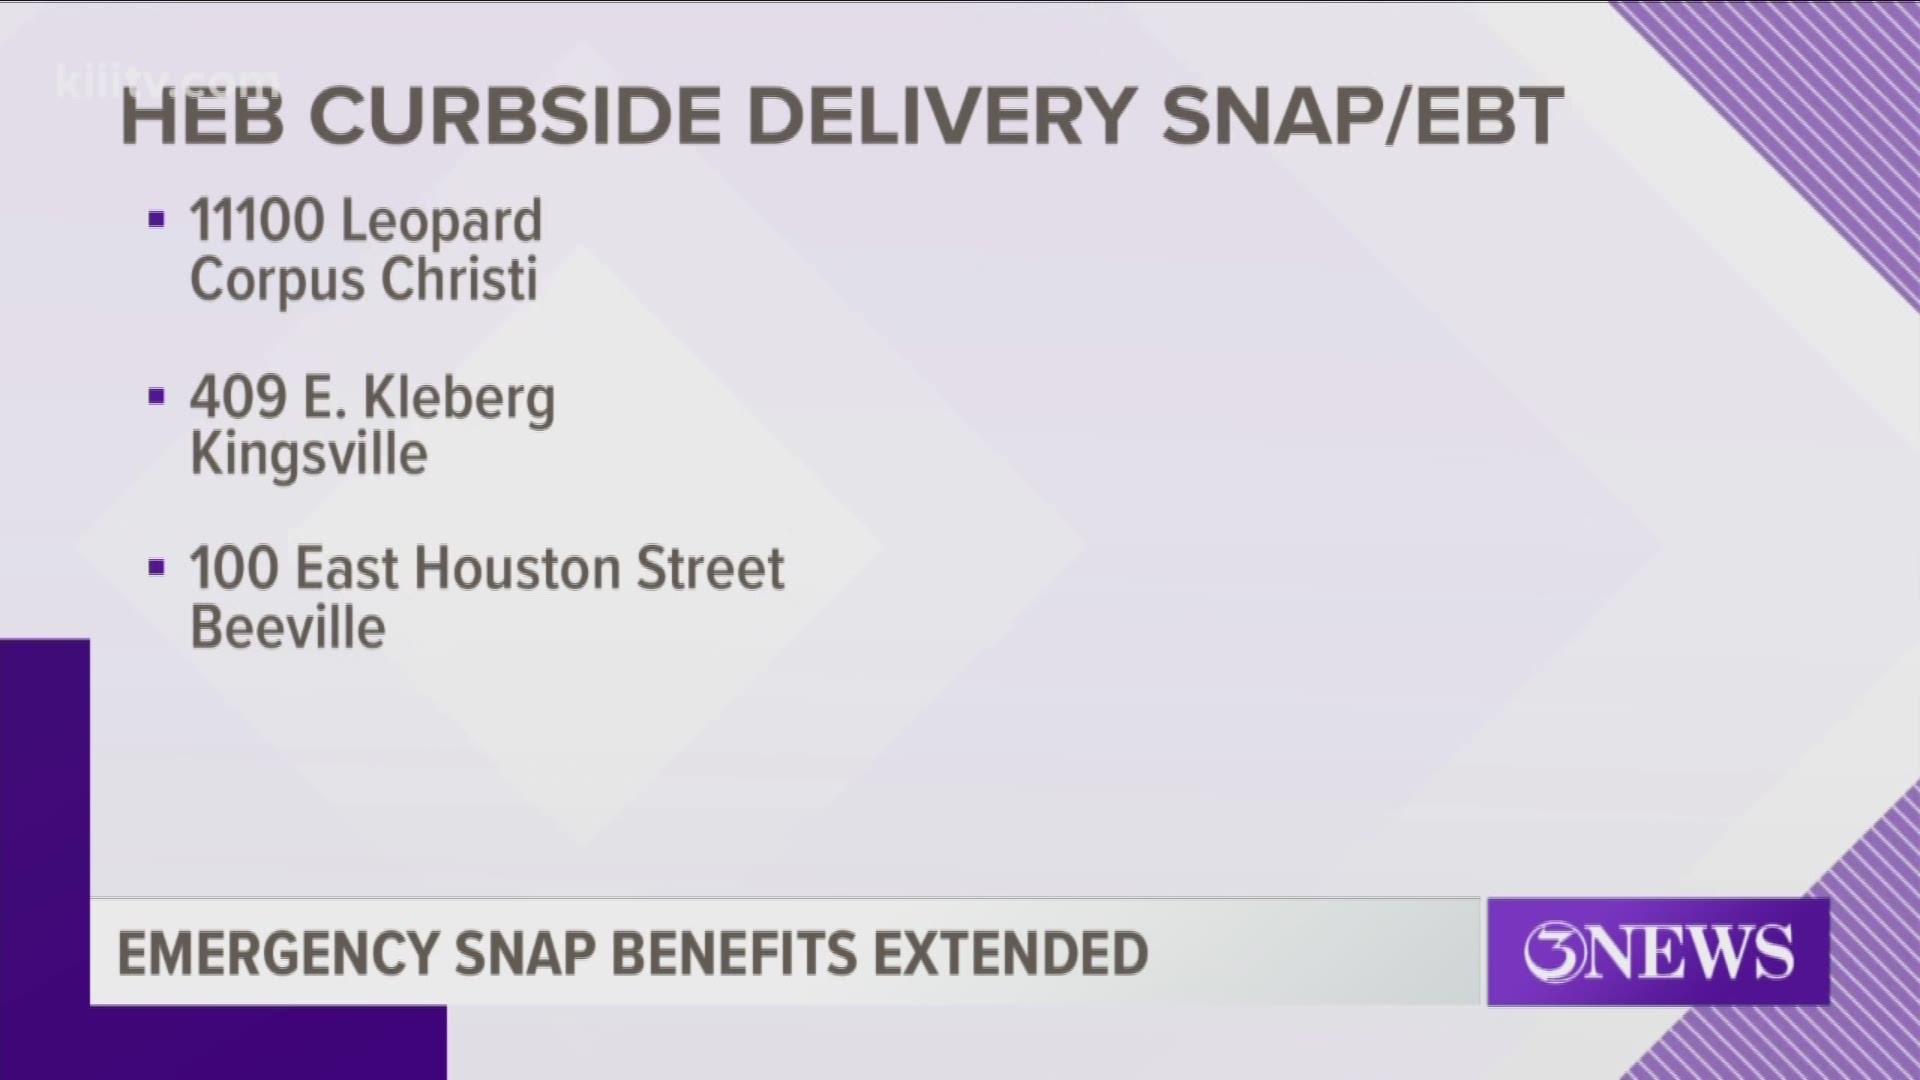 SNAP/EBT now available to use for curbside delivery at select H-E-B